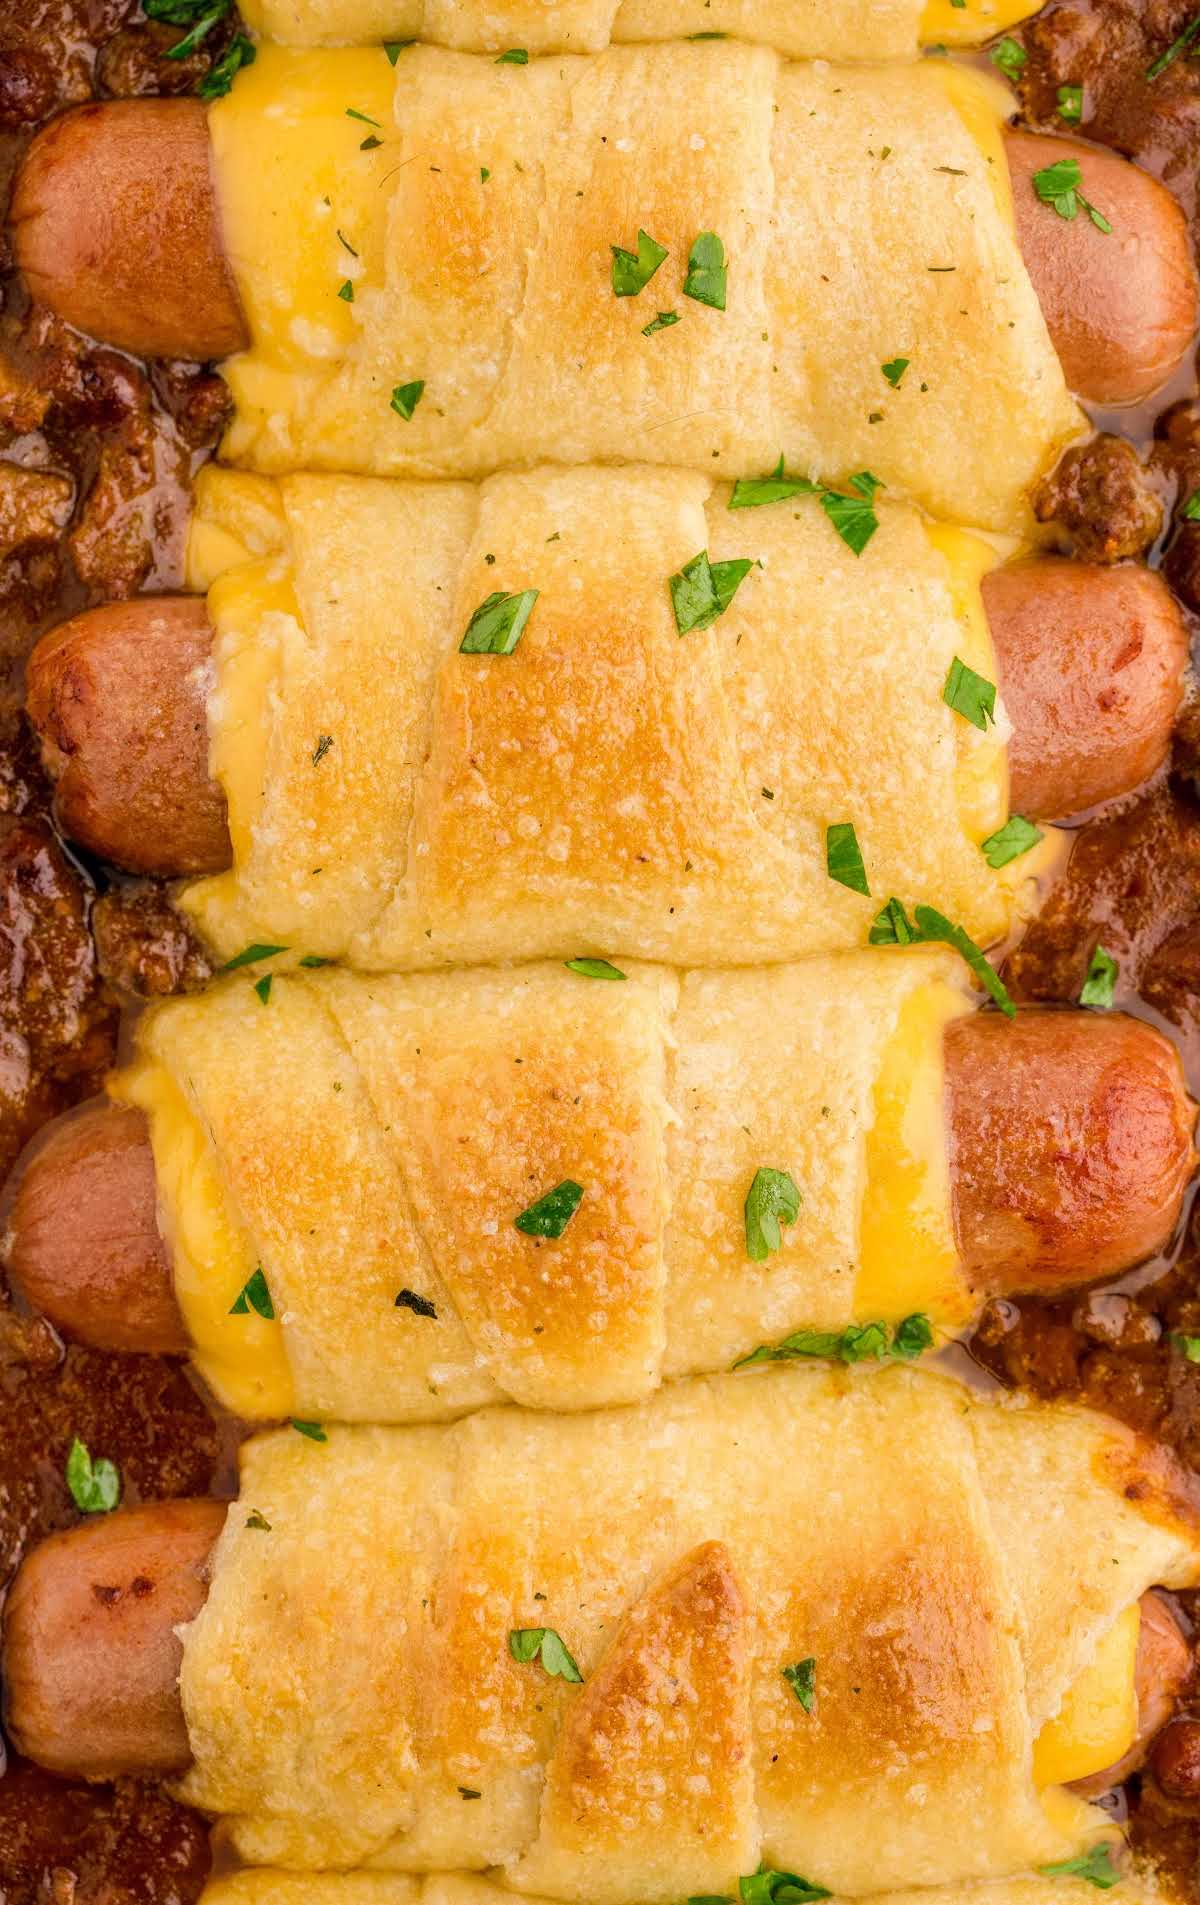 close up overhead shot of a baking dish of chili cheese dog bake garnished with parsley